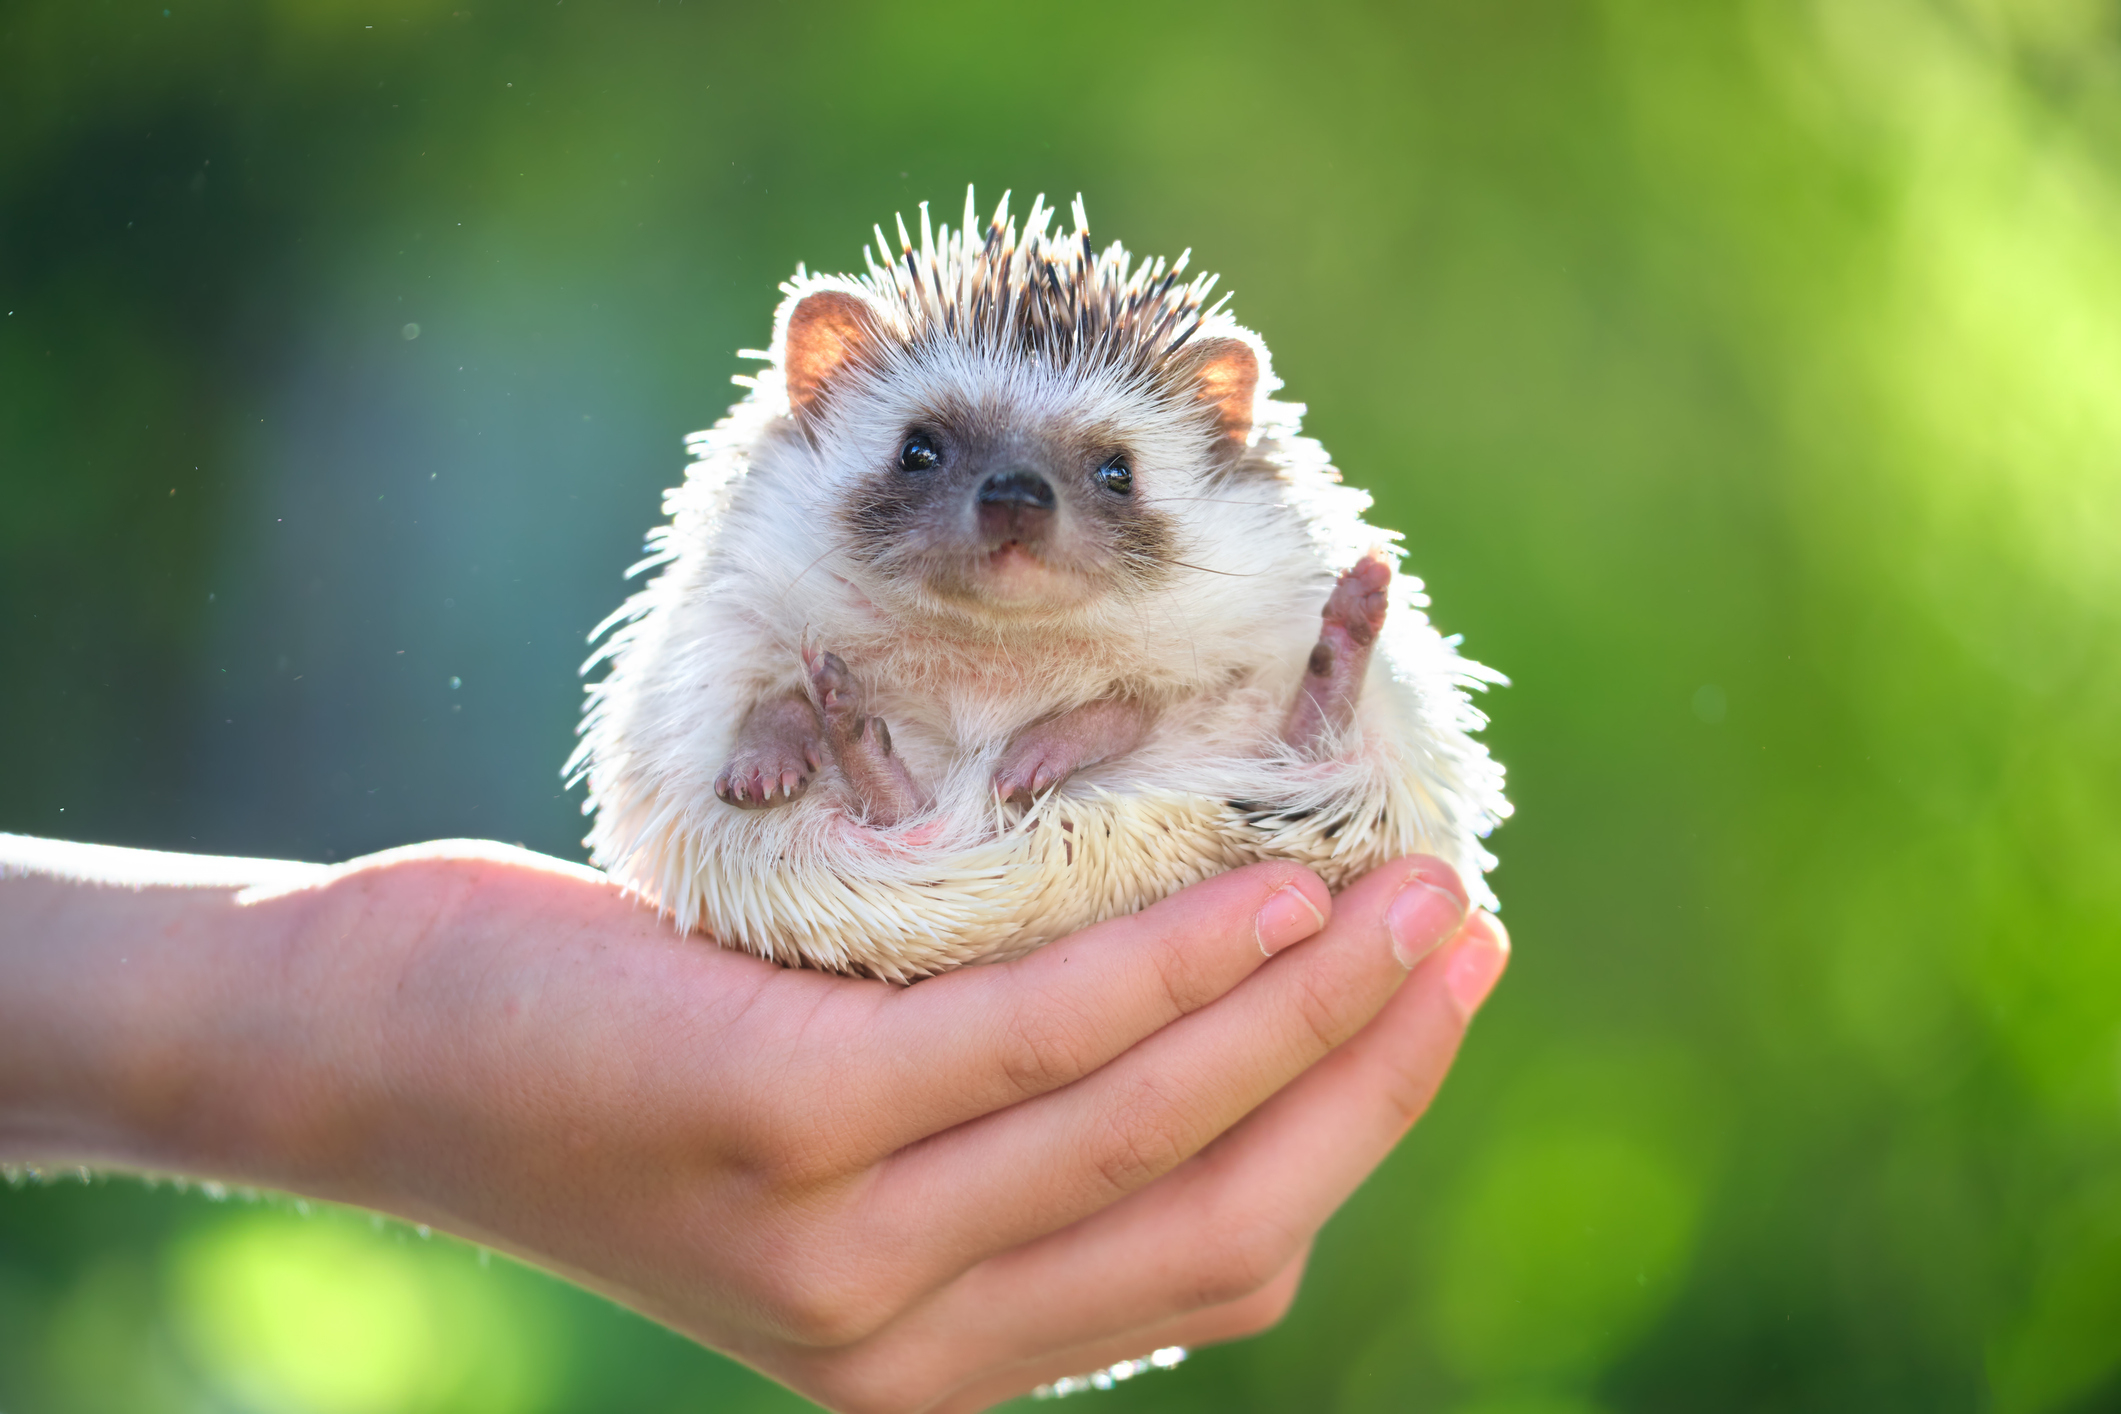 Person holding a hedgehog in their hands outdoors